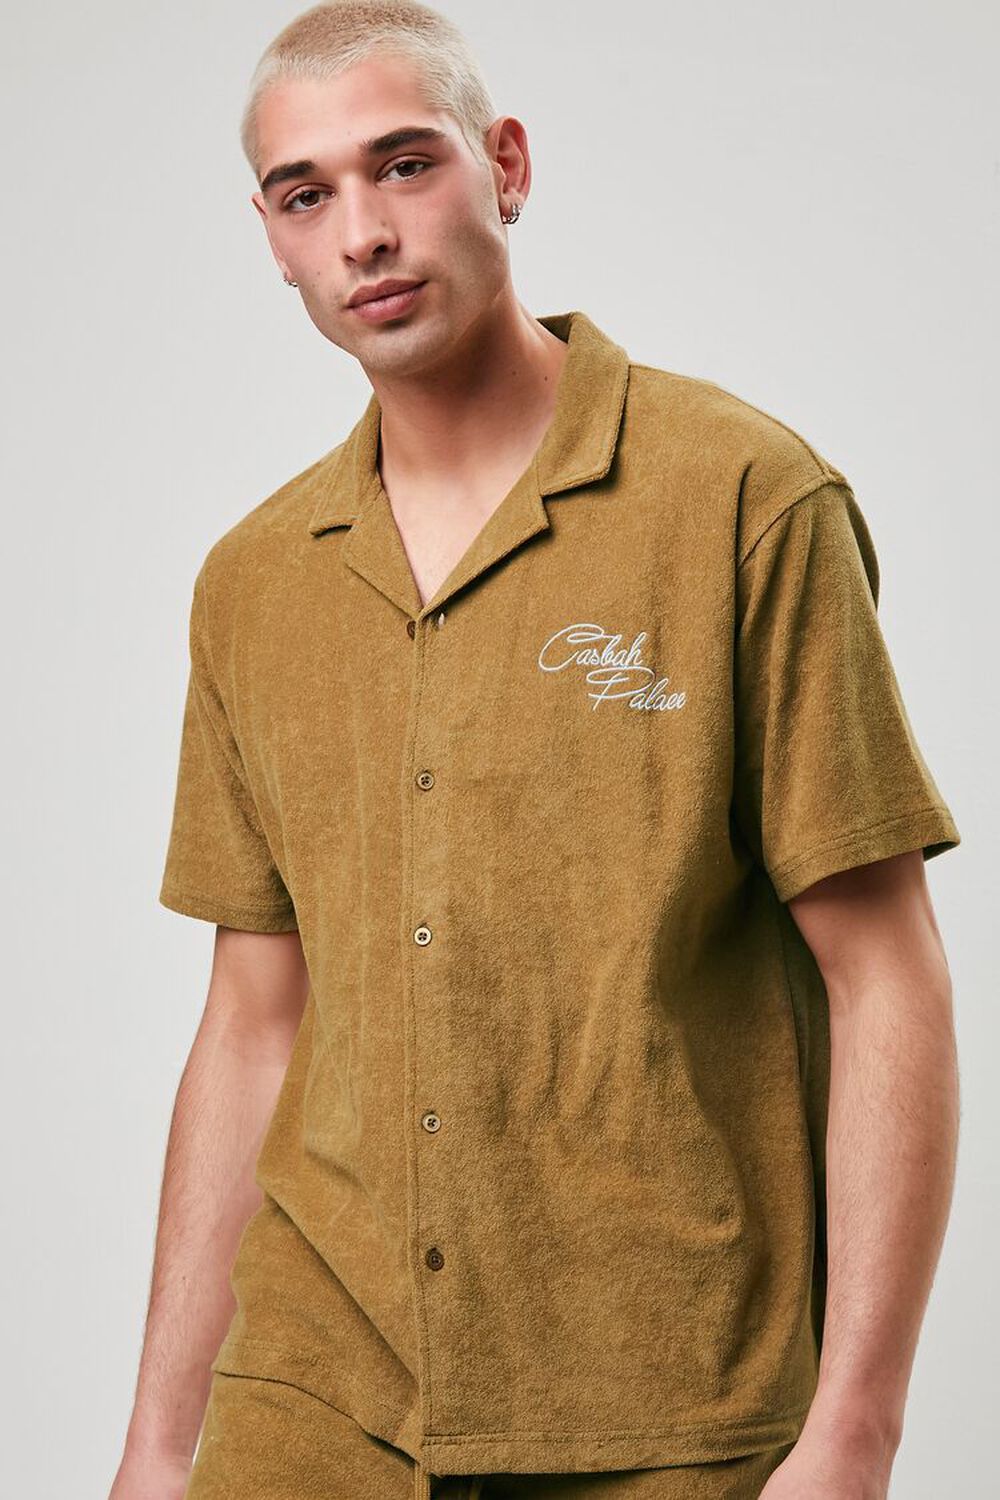 BROWN/WHITE Embroidered Casbah Palace Shirt, image 1